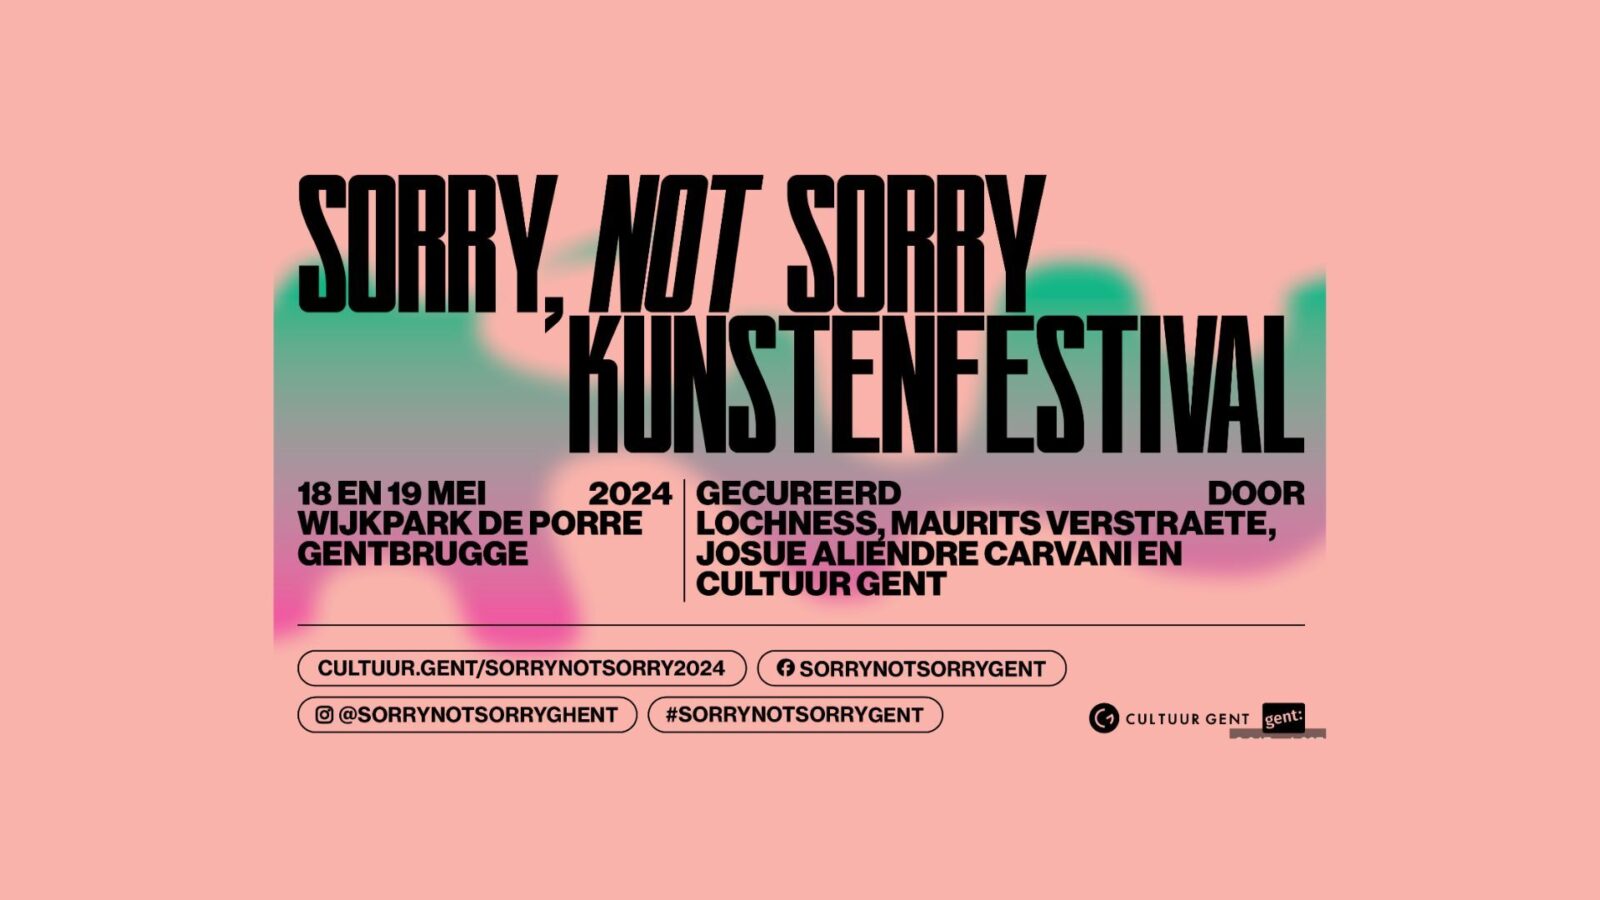 picture of Sorry, Not Sorry Radiospecial